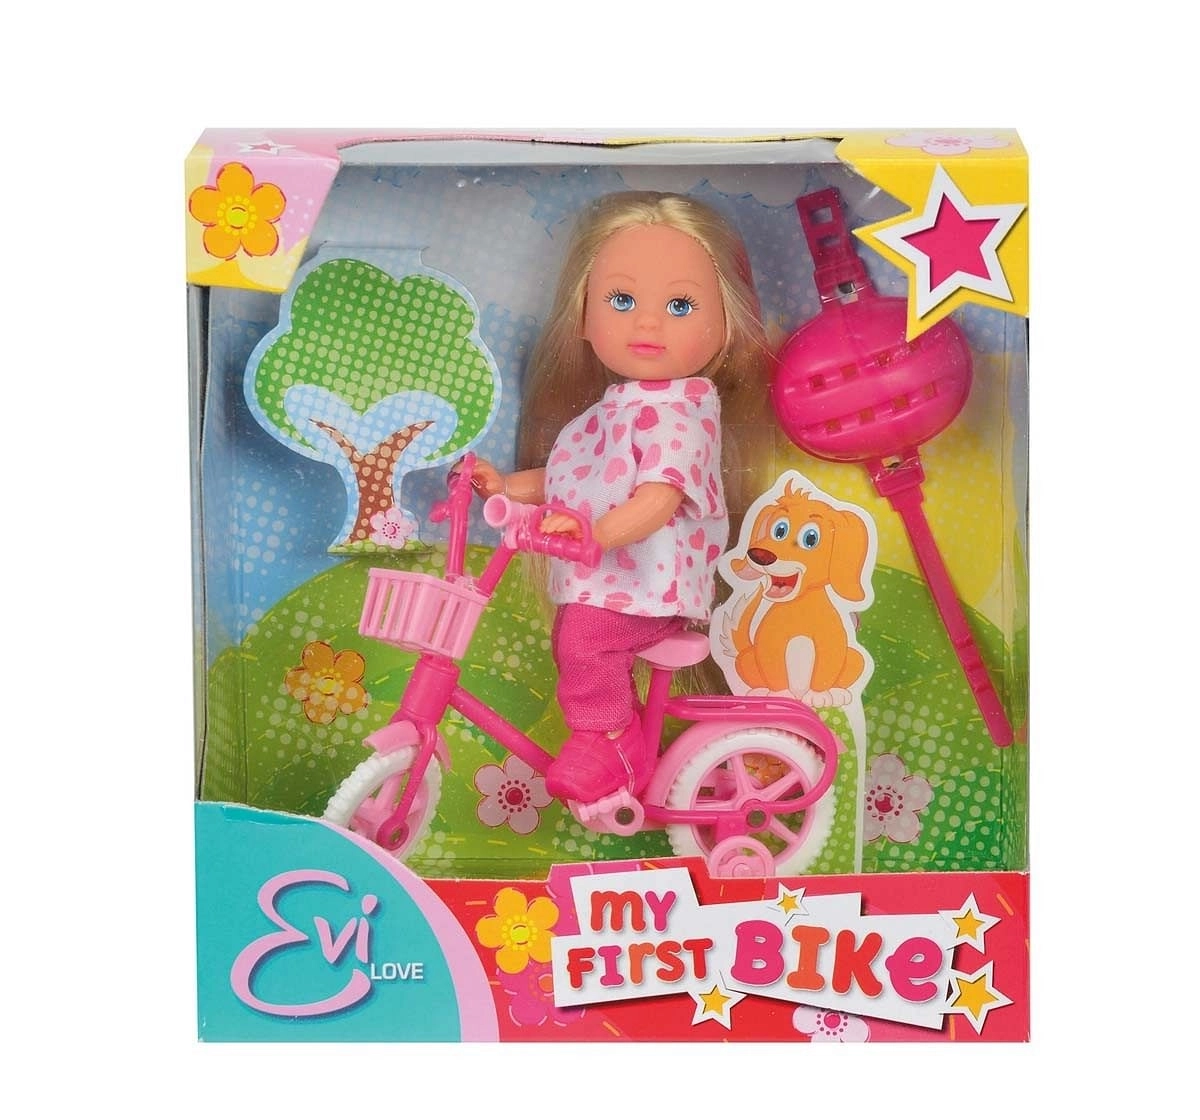 Simba Steffi Love Evi My First Bike Dolls & Accessories for Kids Age 3Y+ (Pink)